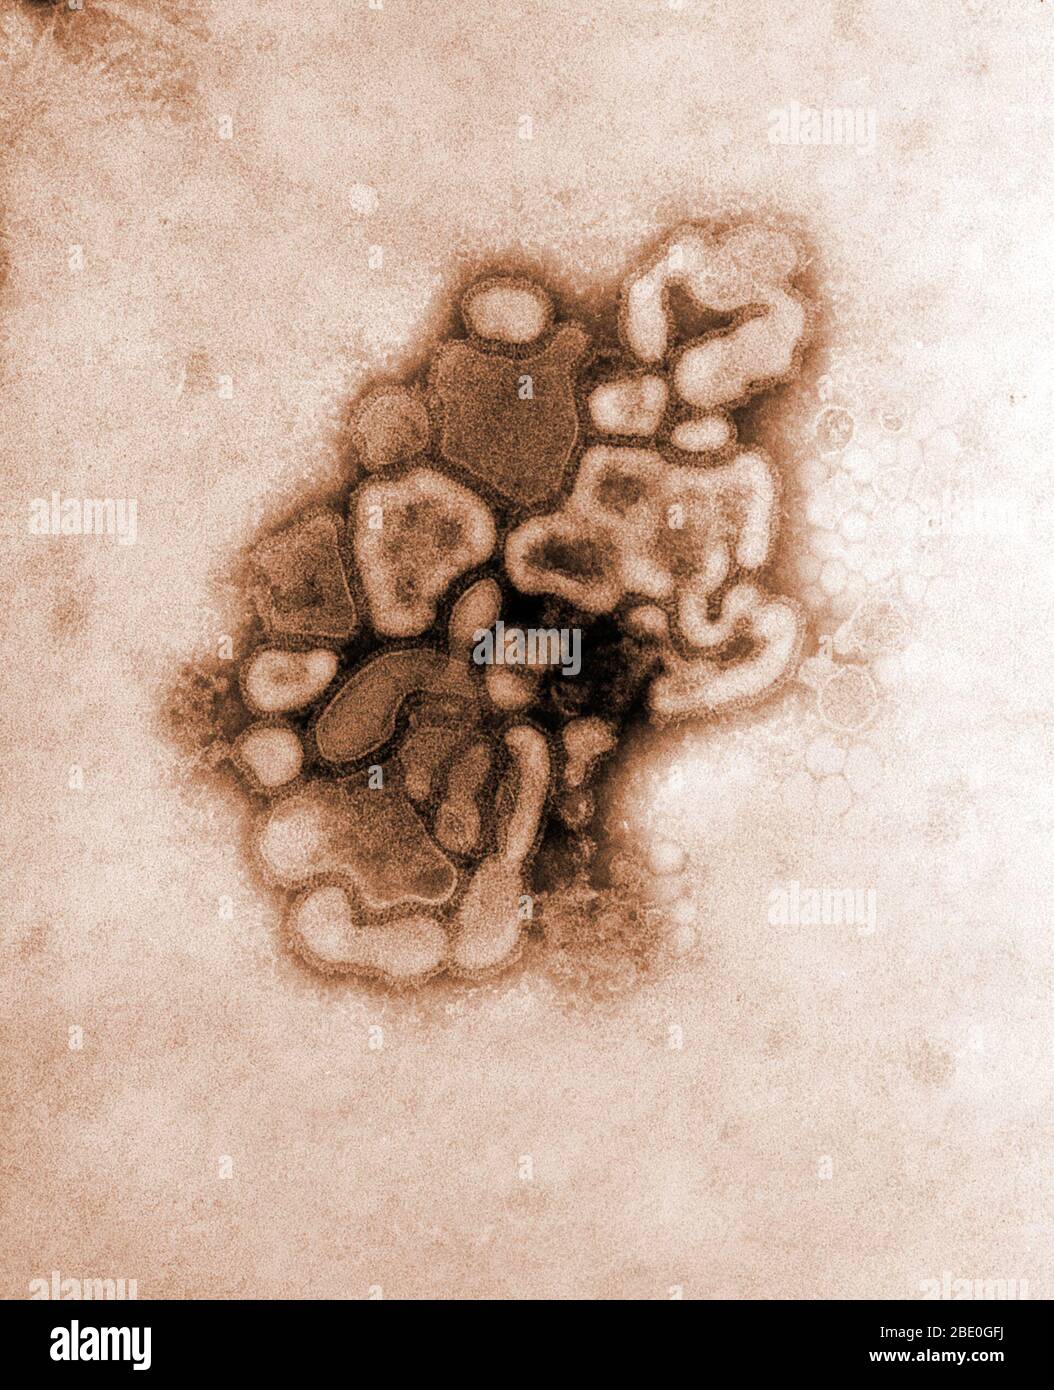 Colorized transmission electron micrograph (TEM) of the A/New Jersey/76 (Hsw1N1) virus, while in the virus' first developmental passage through a chicken egg. Swine Influenza (swine flu) is a respiratory disease of pigs caused by type A influenza that regularly cause outbreaks of influenza among pigs. Swine flu viruses cause high levels of illness and low death rates among pigs. Swine influenza viruses may circulate in swine throughout the year, but most outbreaks among swine herds occur during the late fall and winter months similar to humans. The classical swine flu virus (an influenza type Stock Photo